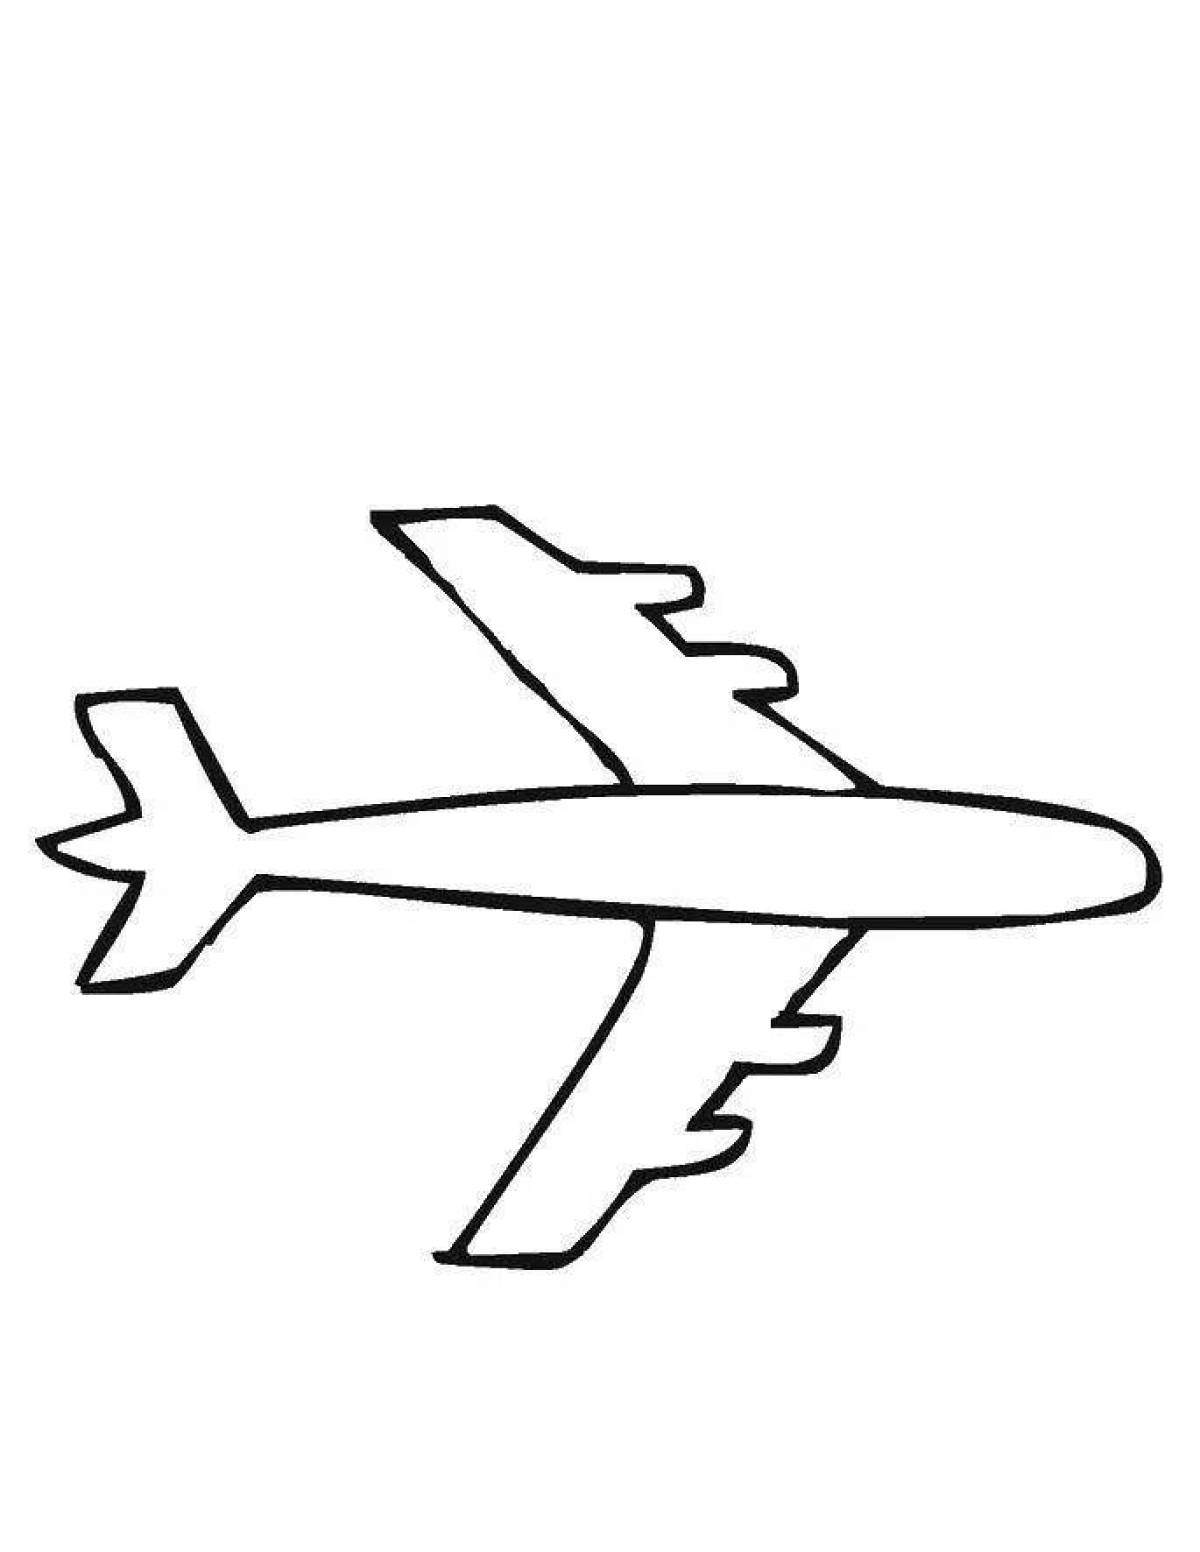 A fun airplane coloring page